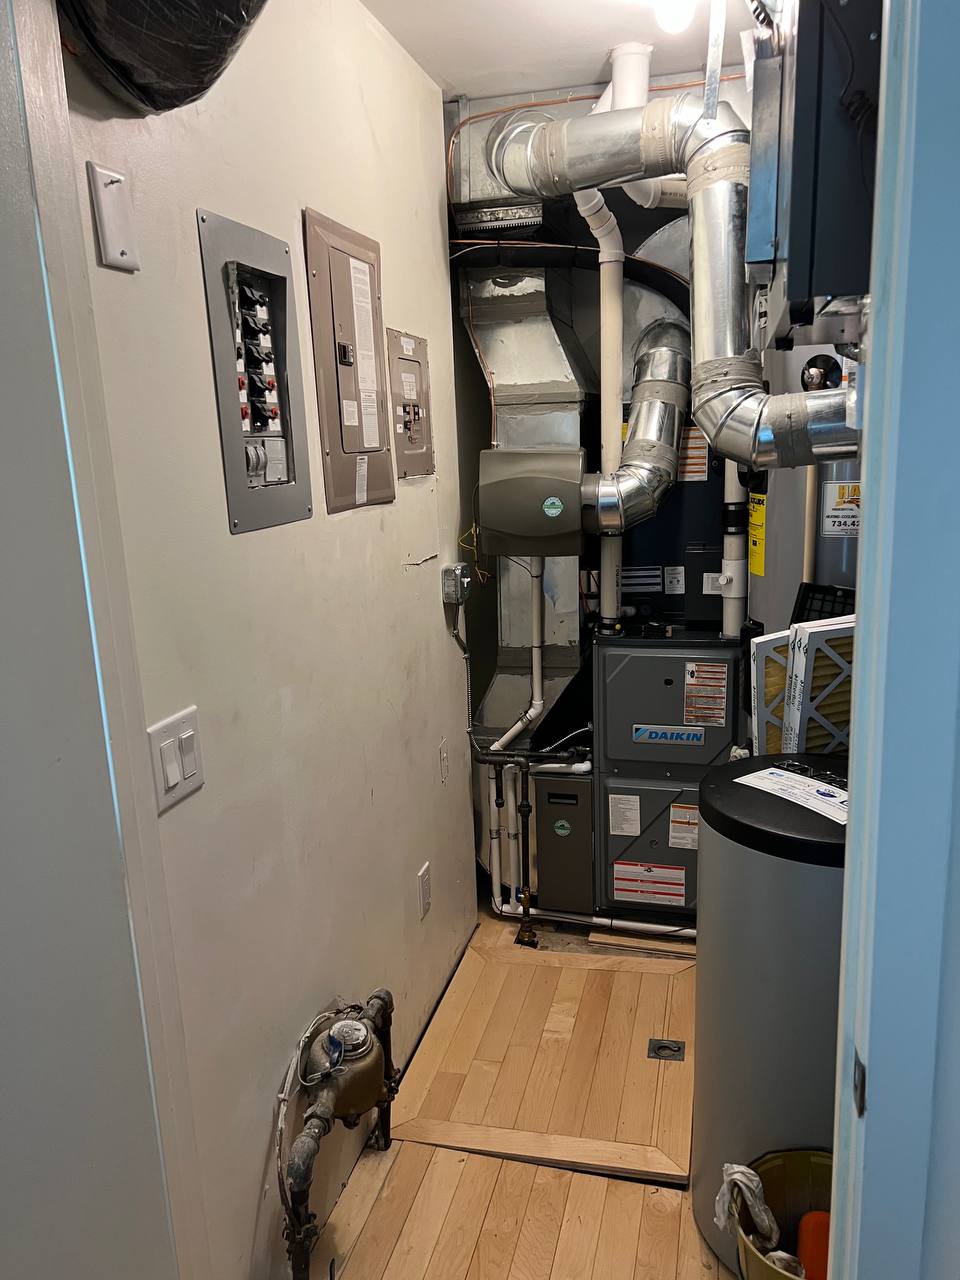 Utility room packed with mechanical equipment and electrical panels